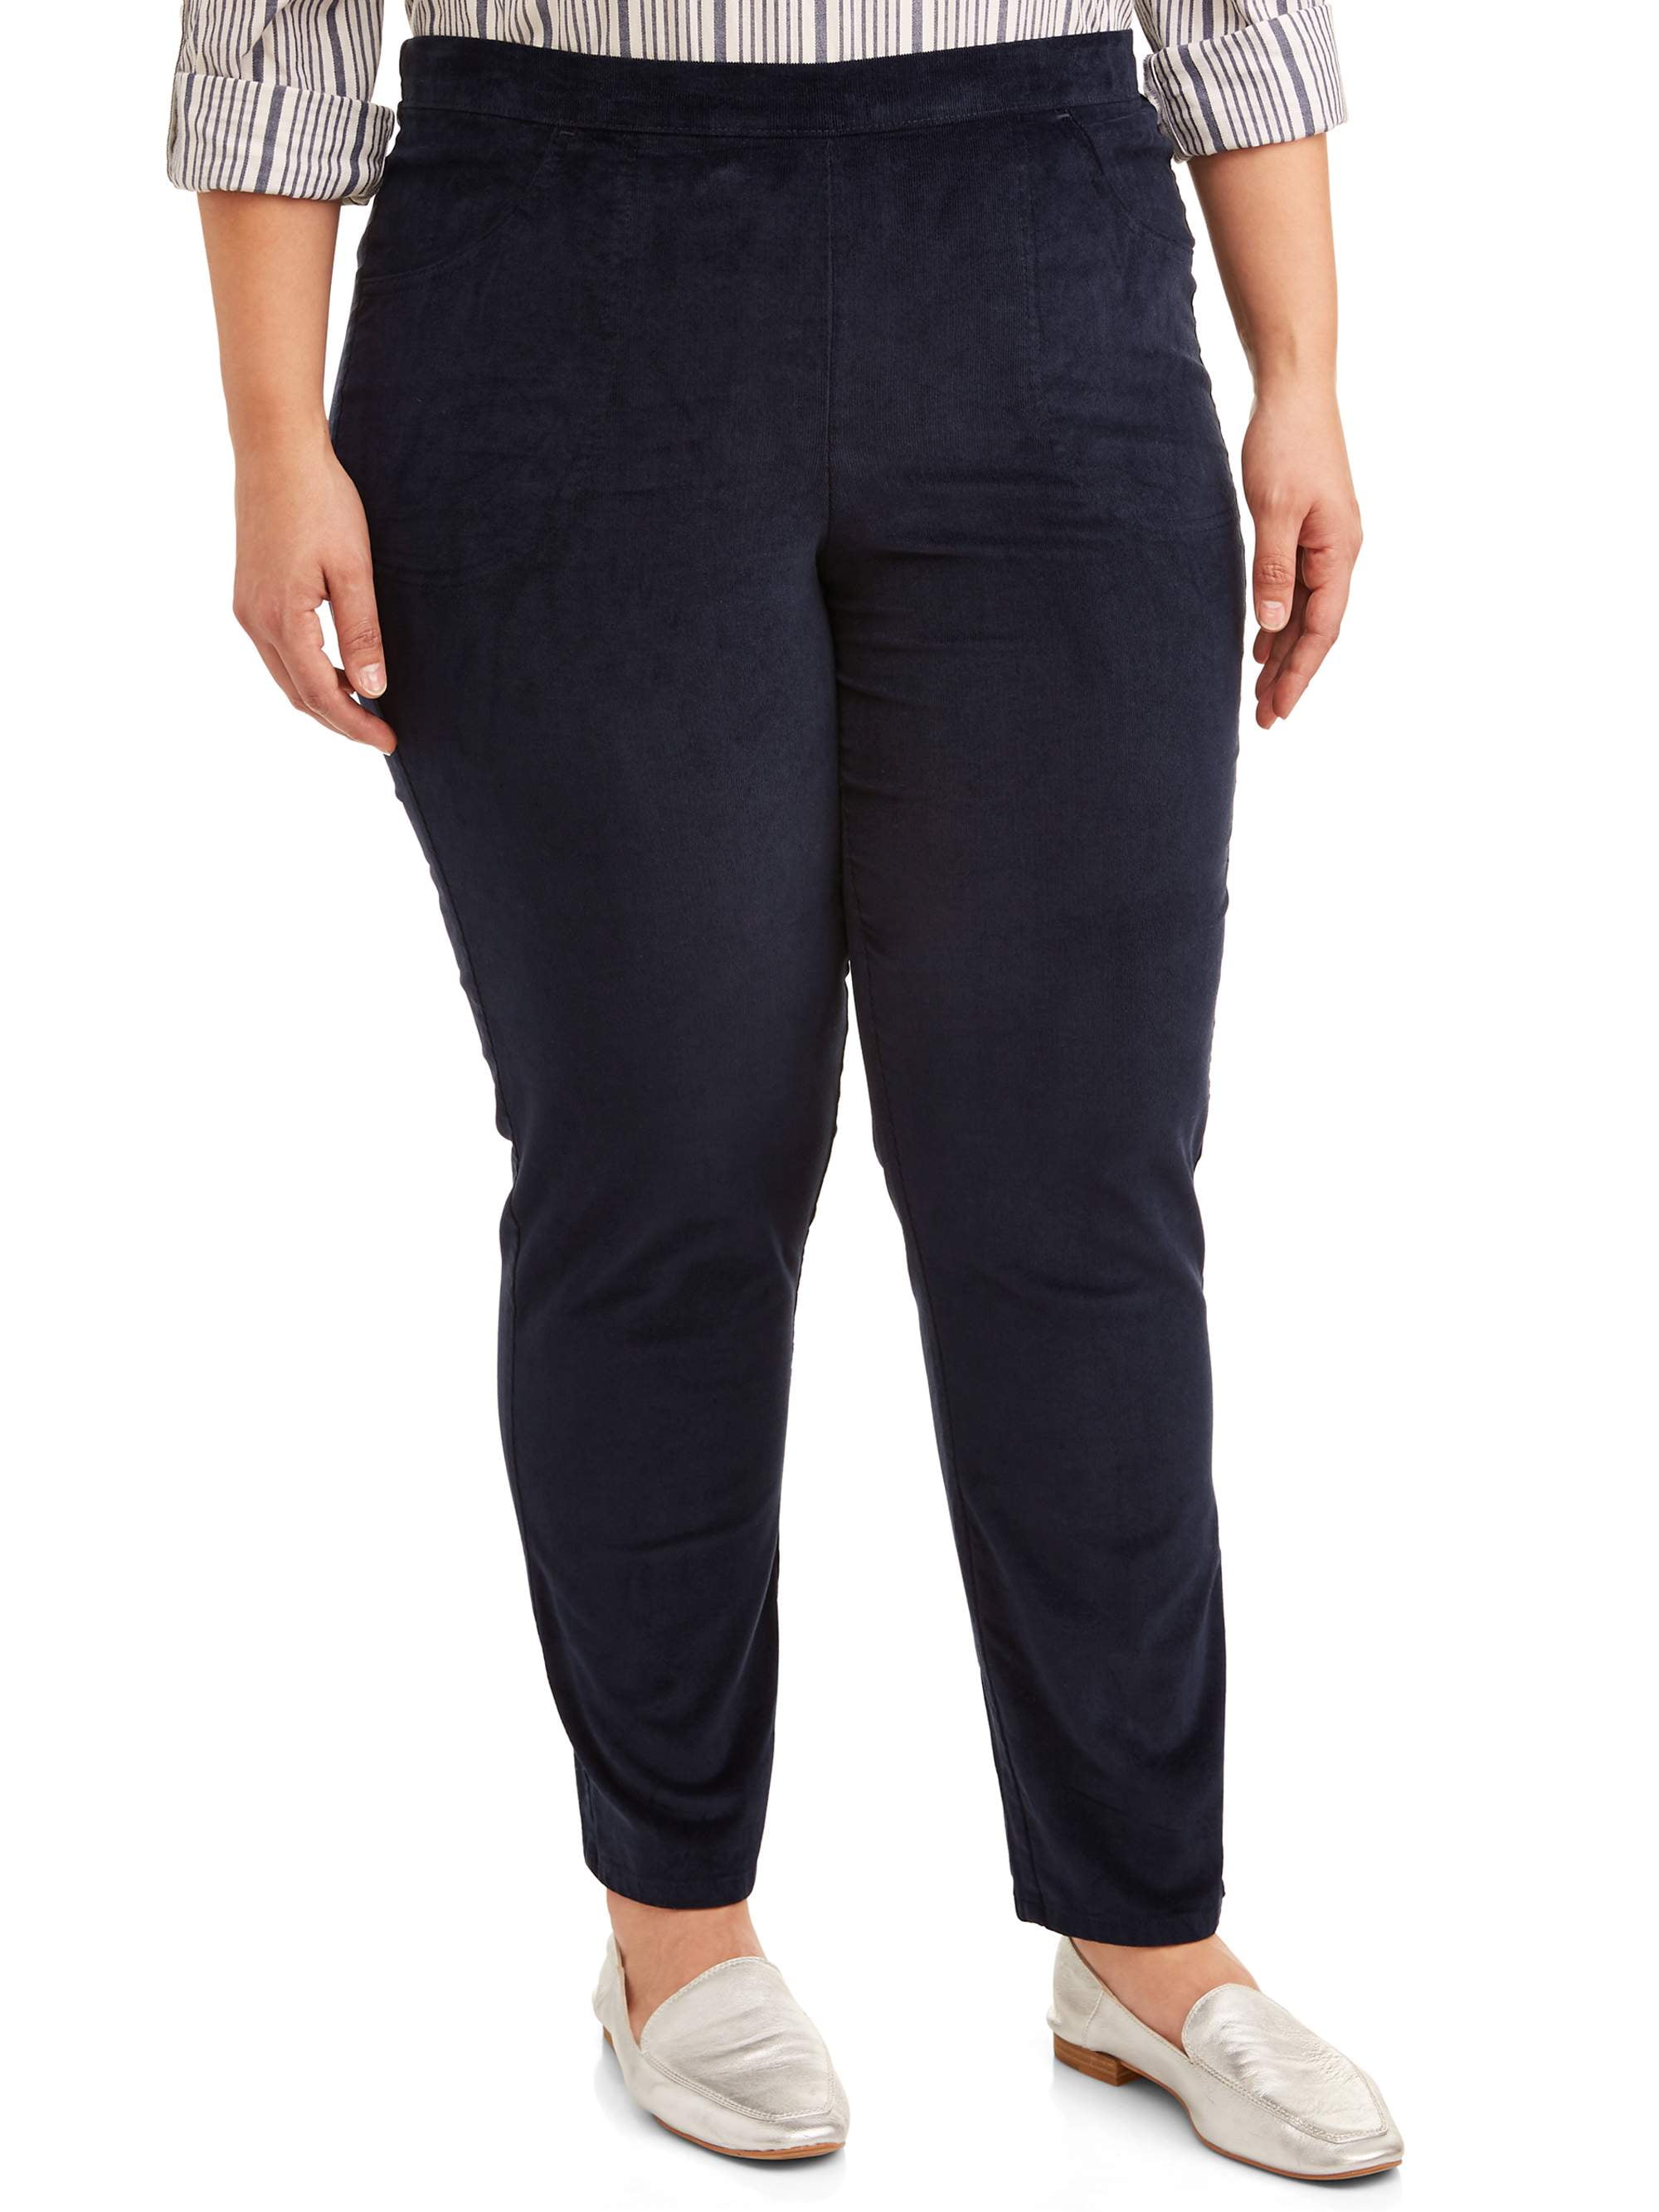 Just My Size Womens Plus Size 2 Pocket Stretch Pull on Pants 2 Pack   Walmartcom